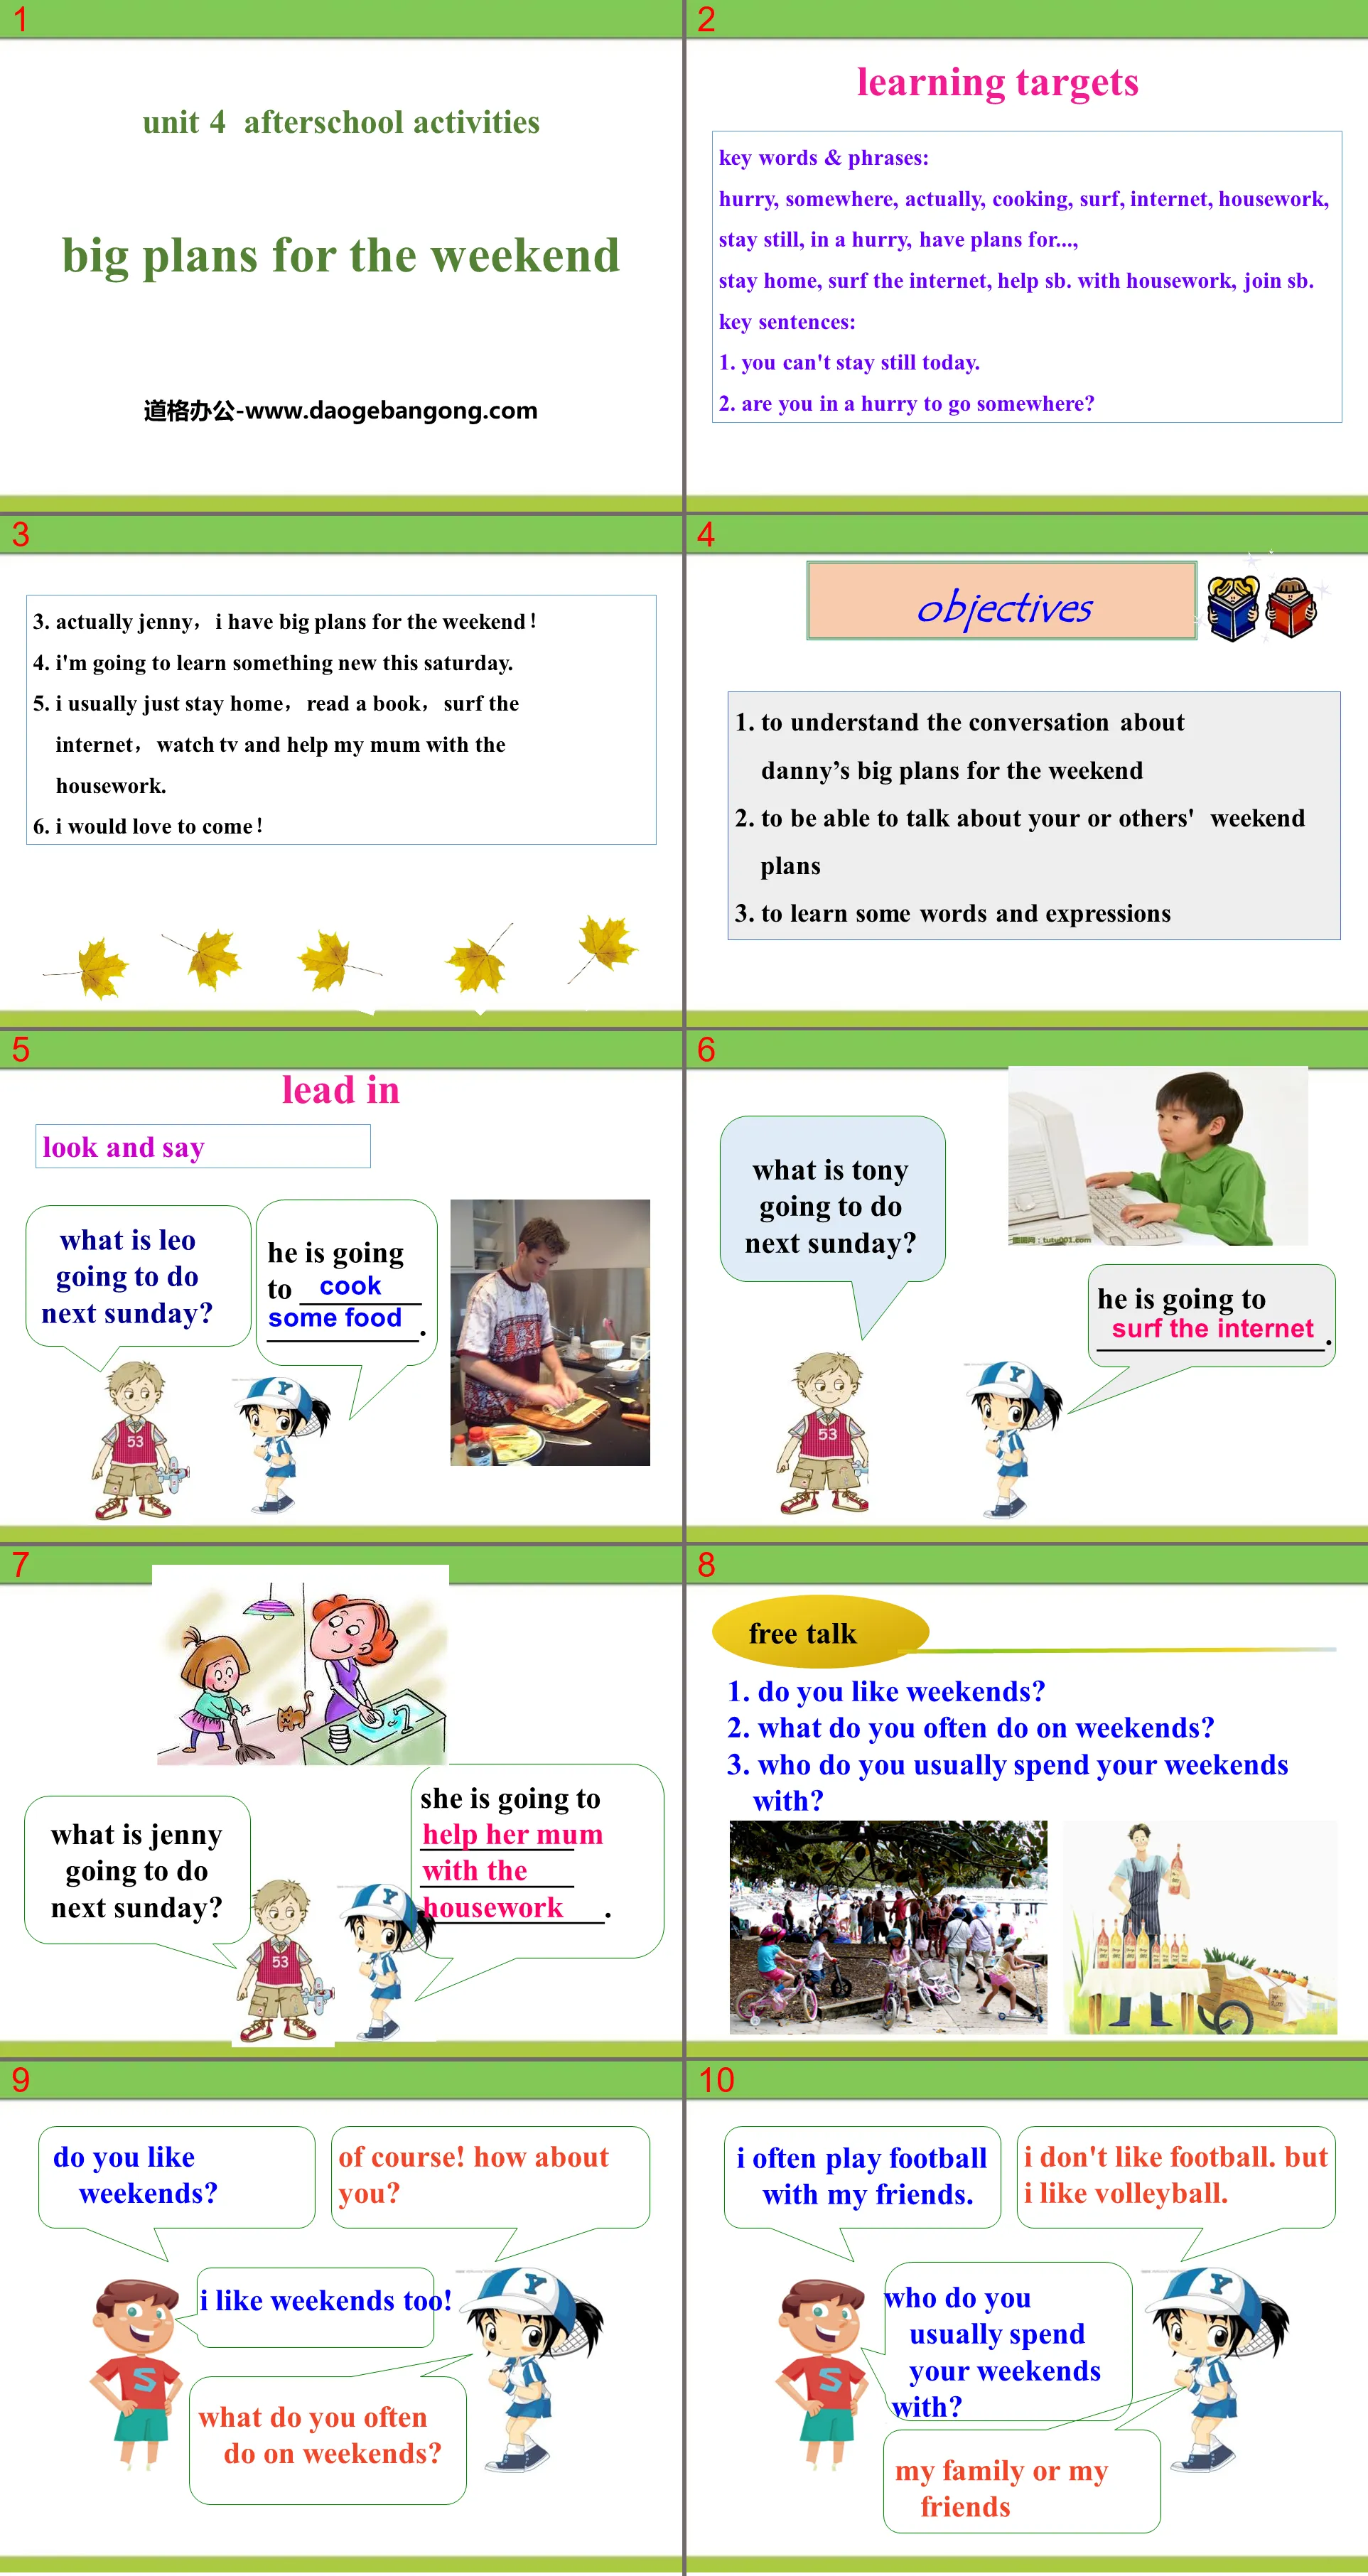 《Big Plans for the Weekend》After-School Activities PPT免费课件
